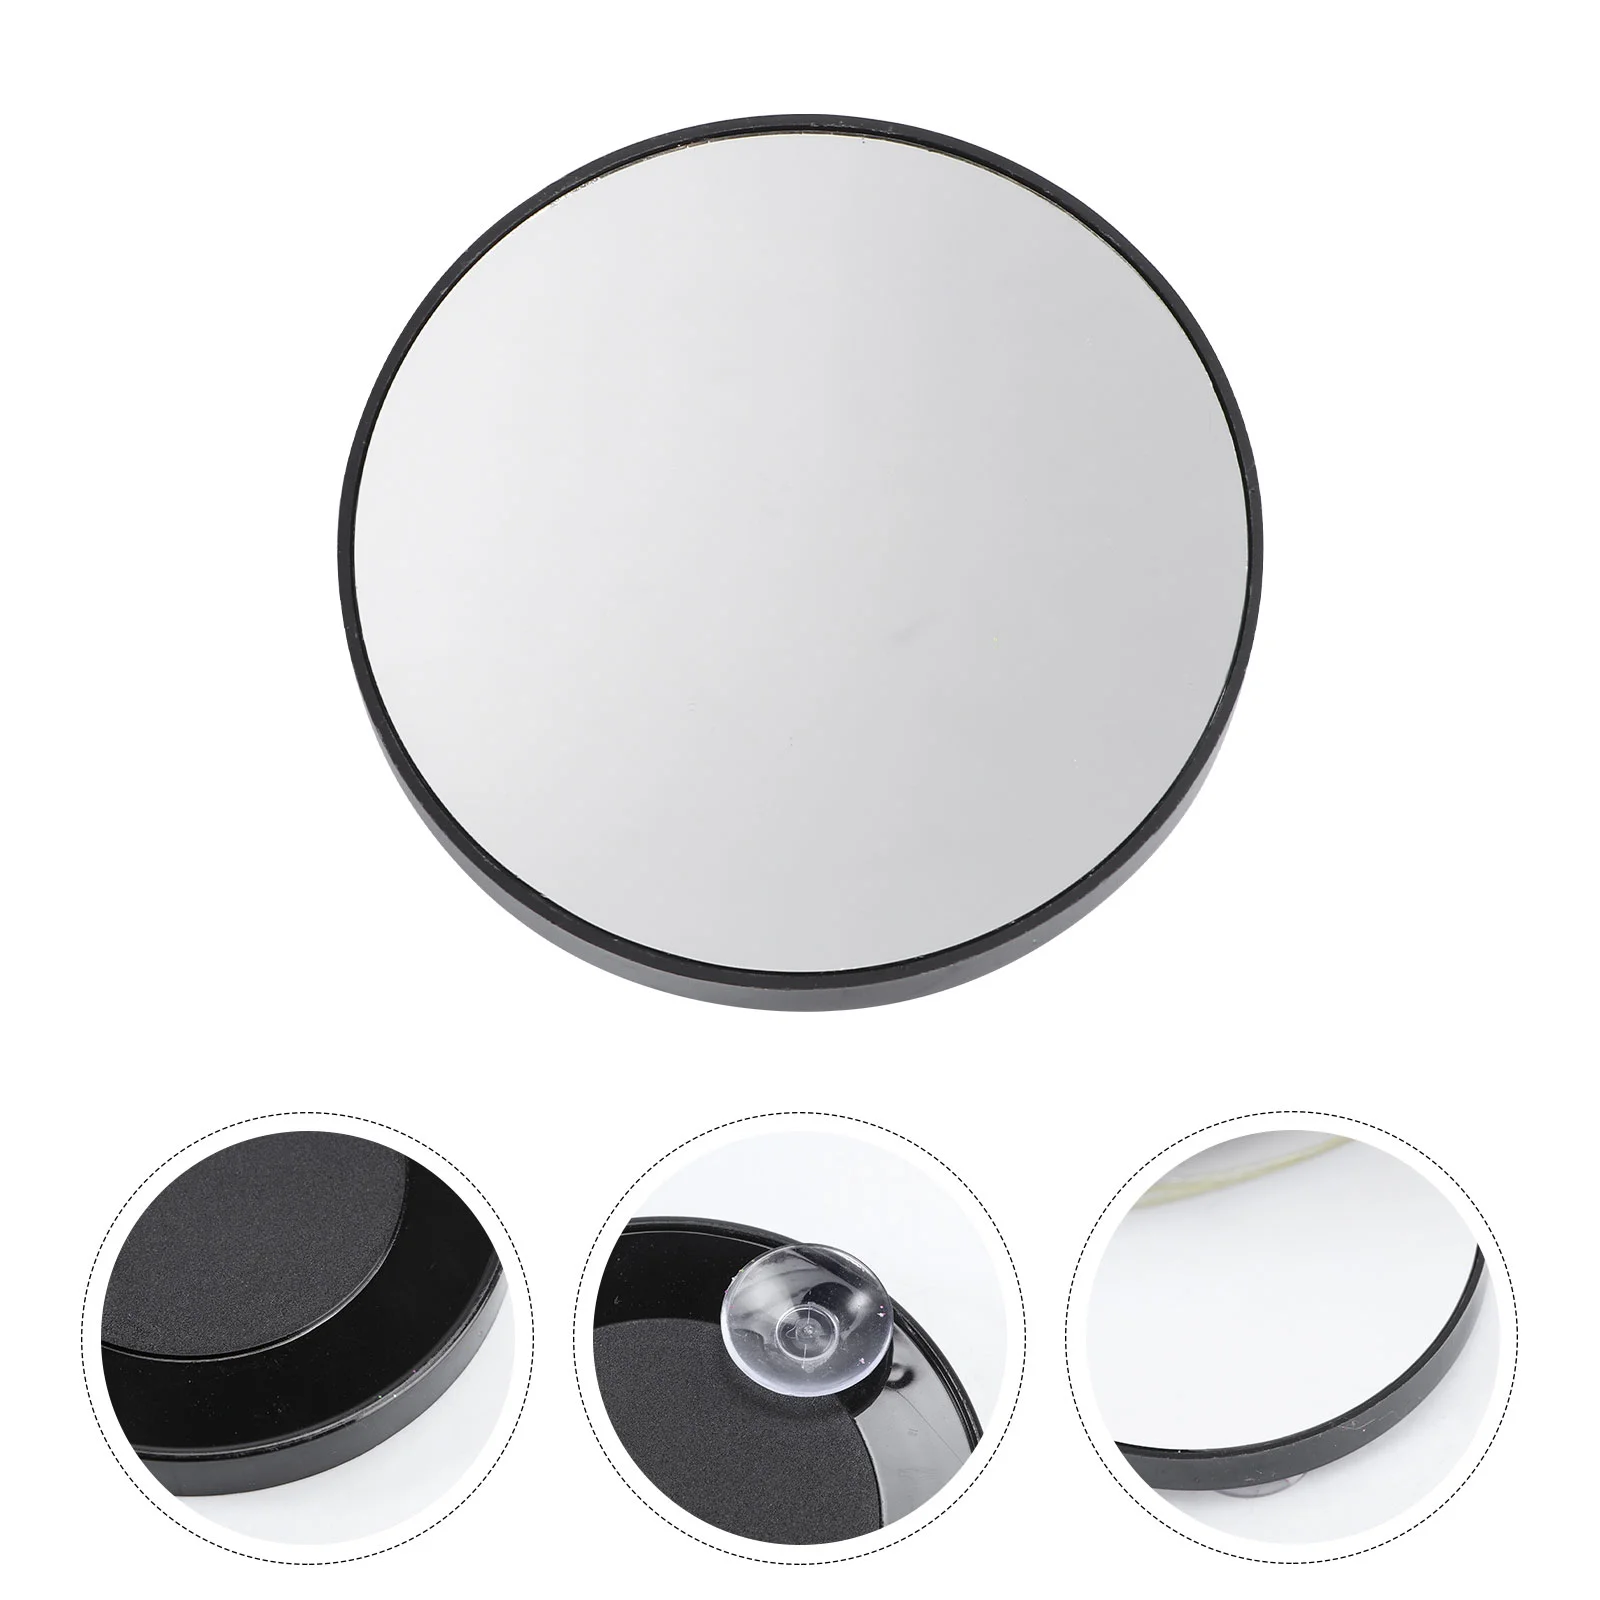 

Mirror Suction Magnifying Makeup Travel Cup Shower Cups Fogless Bathroom 15X Compact Shaving Portable Vanity Round Magnify Hair